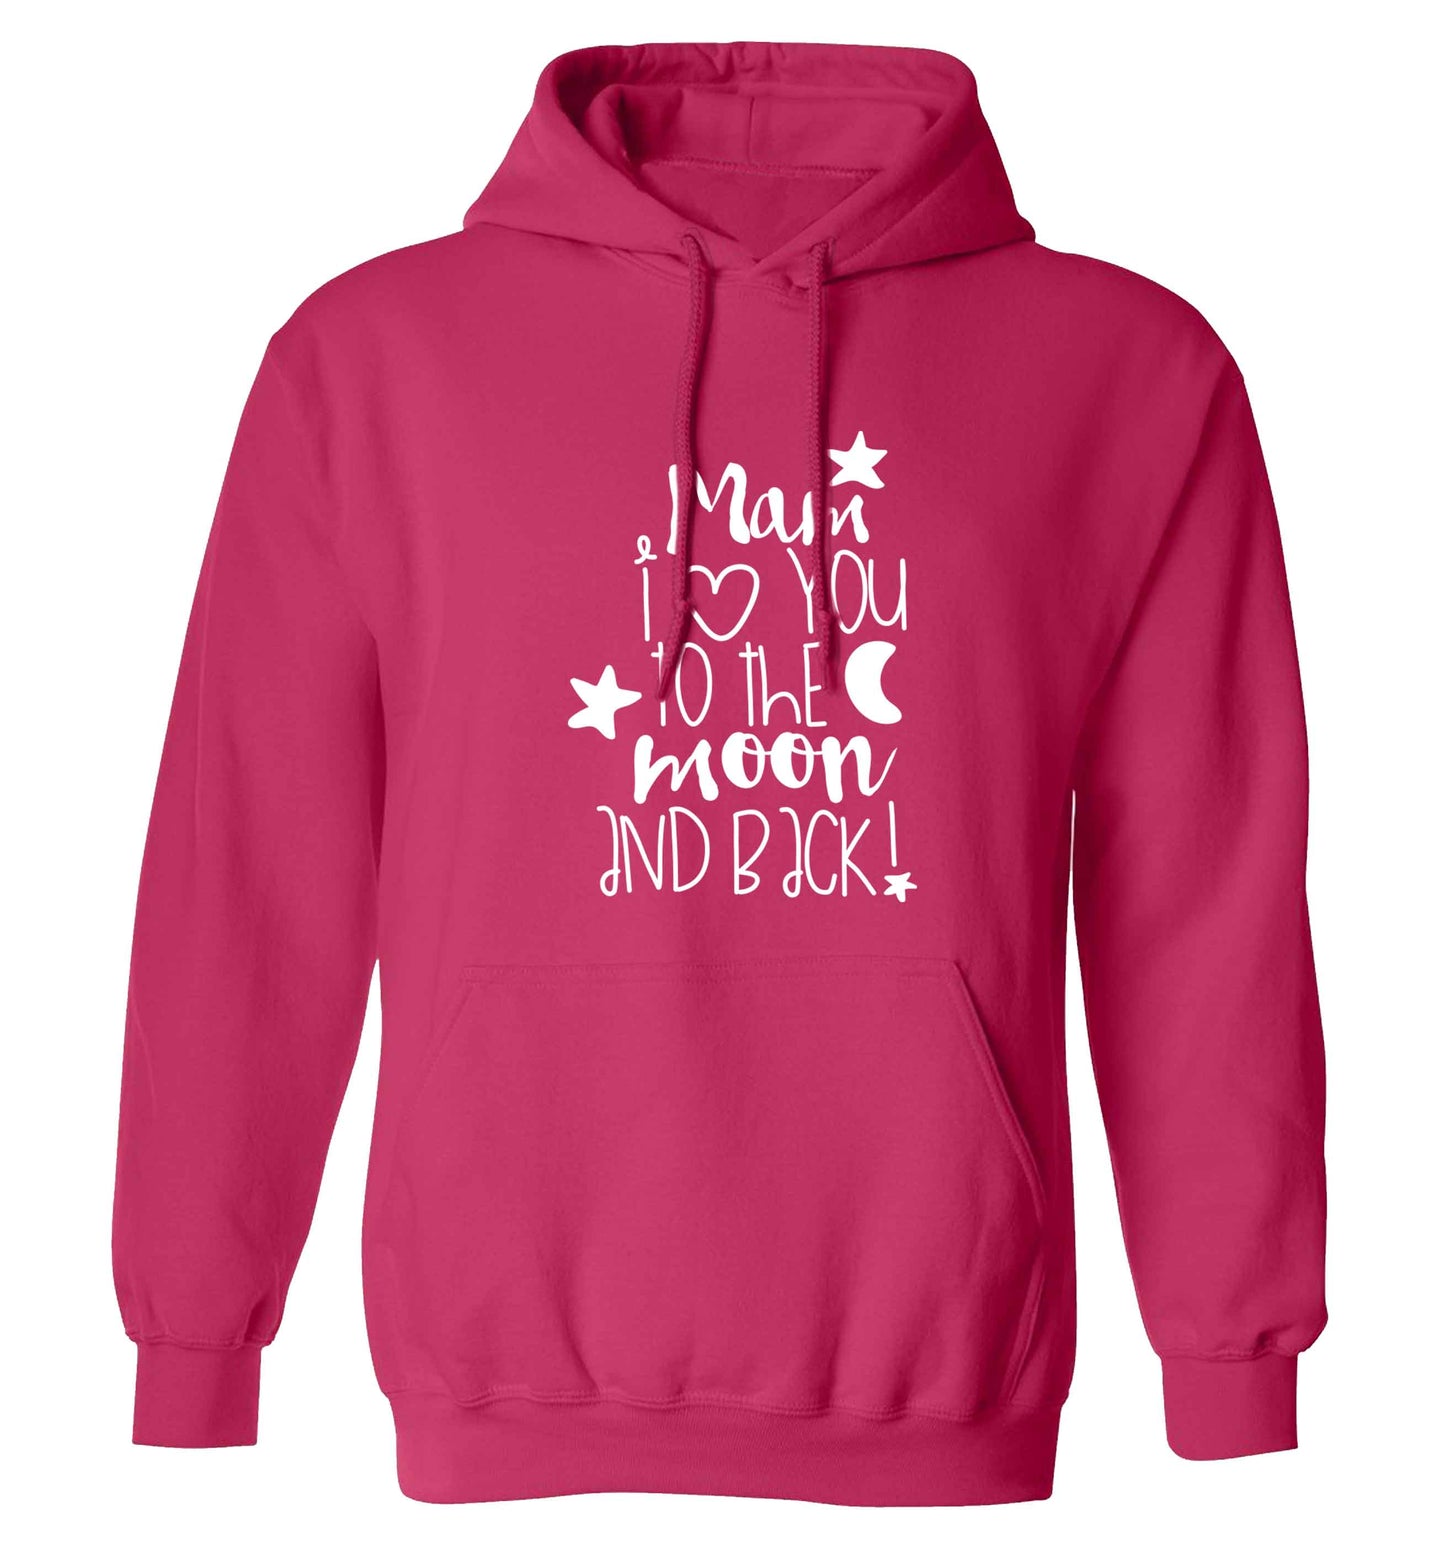 Mam I love you to the moon and back adults unisex pink hoodie 2XL